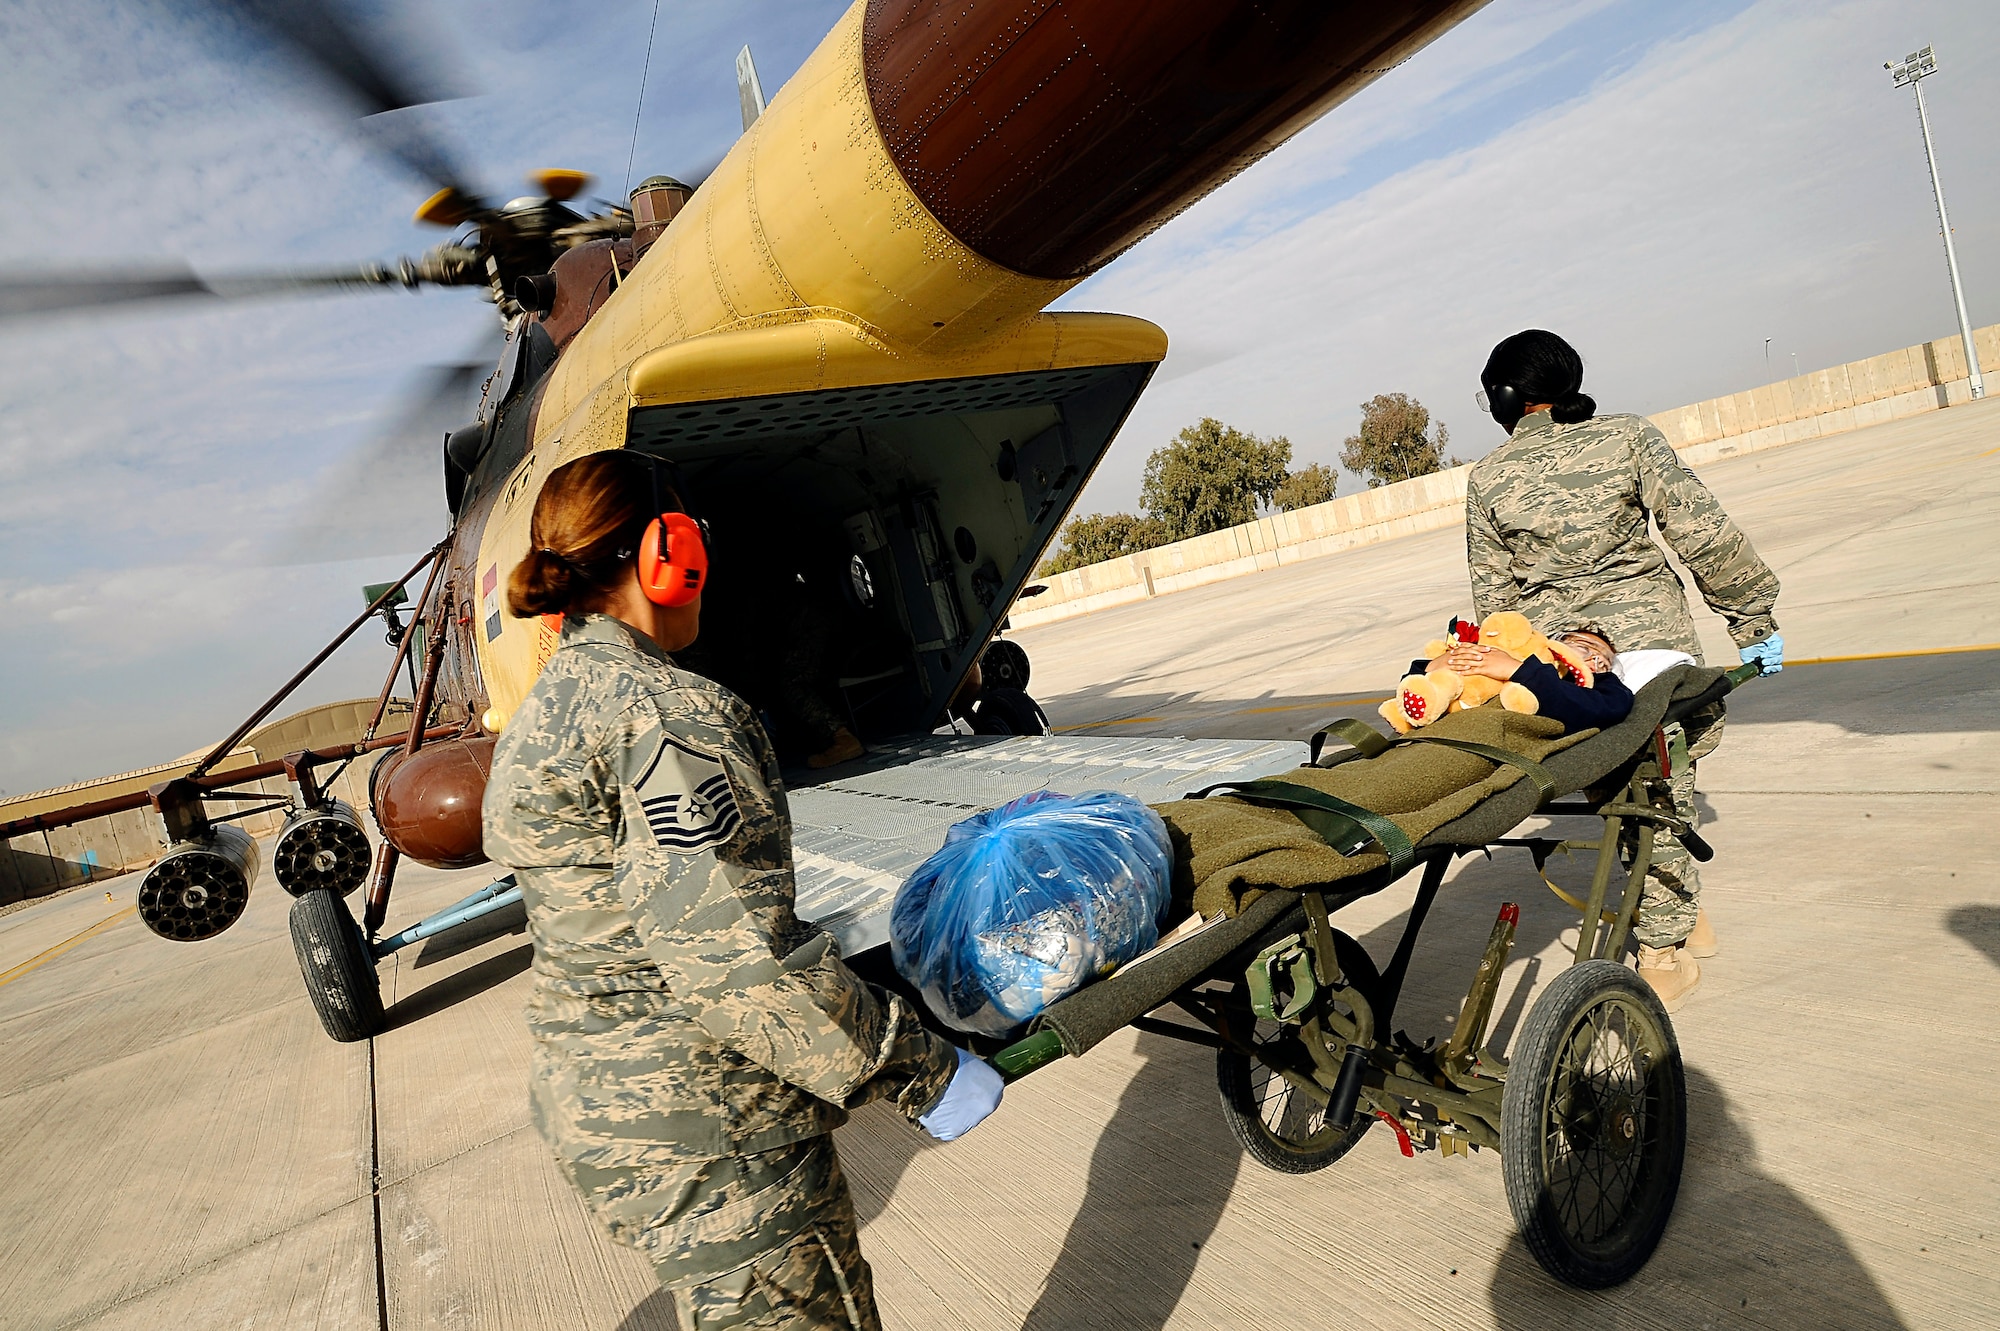 Master Sgt. Ana Ortiz (left) and Master Sgt. Diana Nelson transport Mustafa Jasim to an Iraqi air force Mi-17 Hip helicopter at Joint Base Balad, Iraq, Dec. 20. Mustafa, his brother Ali and an Iraqi police officer were transported from Balad to the 86th Combat Support Hospital in Baghdad. Sergeant Ortiz, the 332nd Expeditionary Logistics Readiness Squadron Personnel Support for Contingency Operations superintendent, and Sergeant Nelson, the PERSCO NCO in charge, are deployed from the Connecticut Air National Guard's 103rd Airlift Wing. (U.S. Air Force photo/Airman 1st Class Jason Epley) 